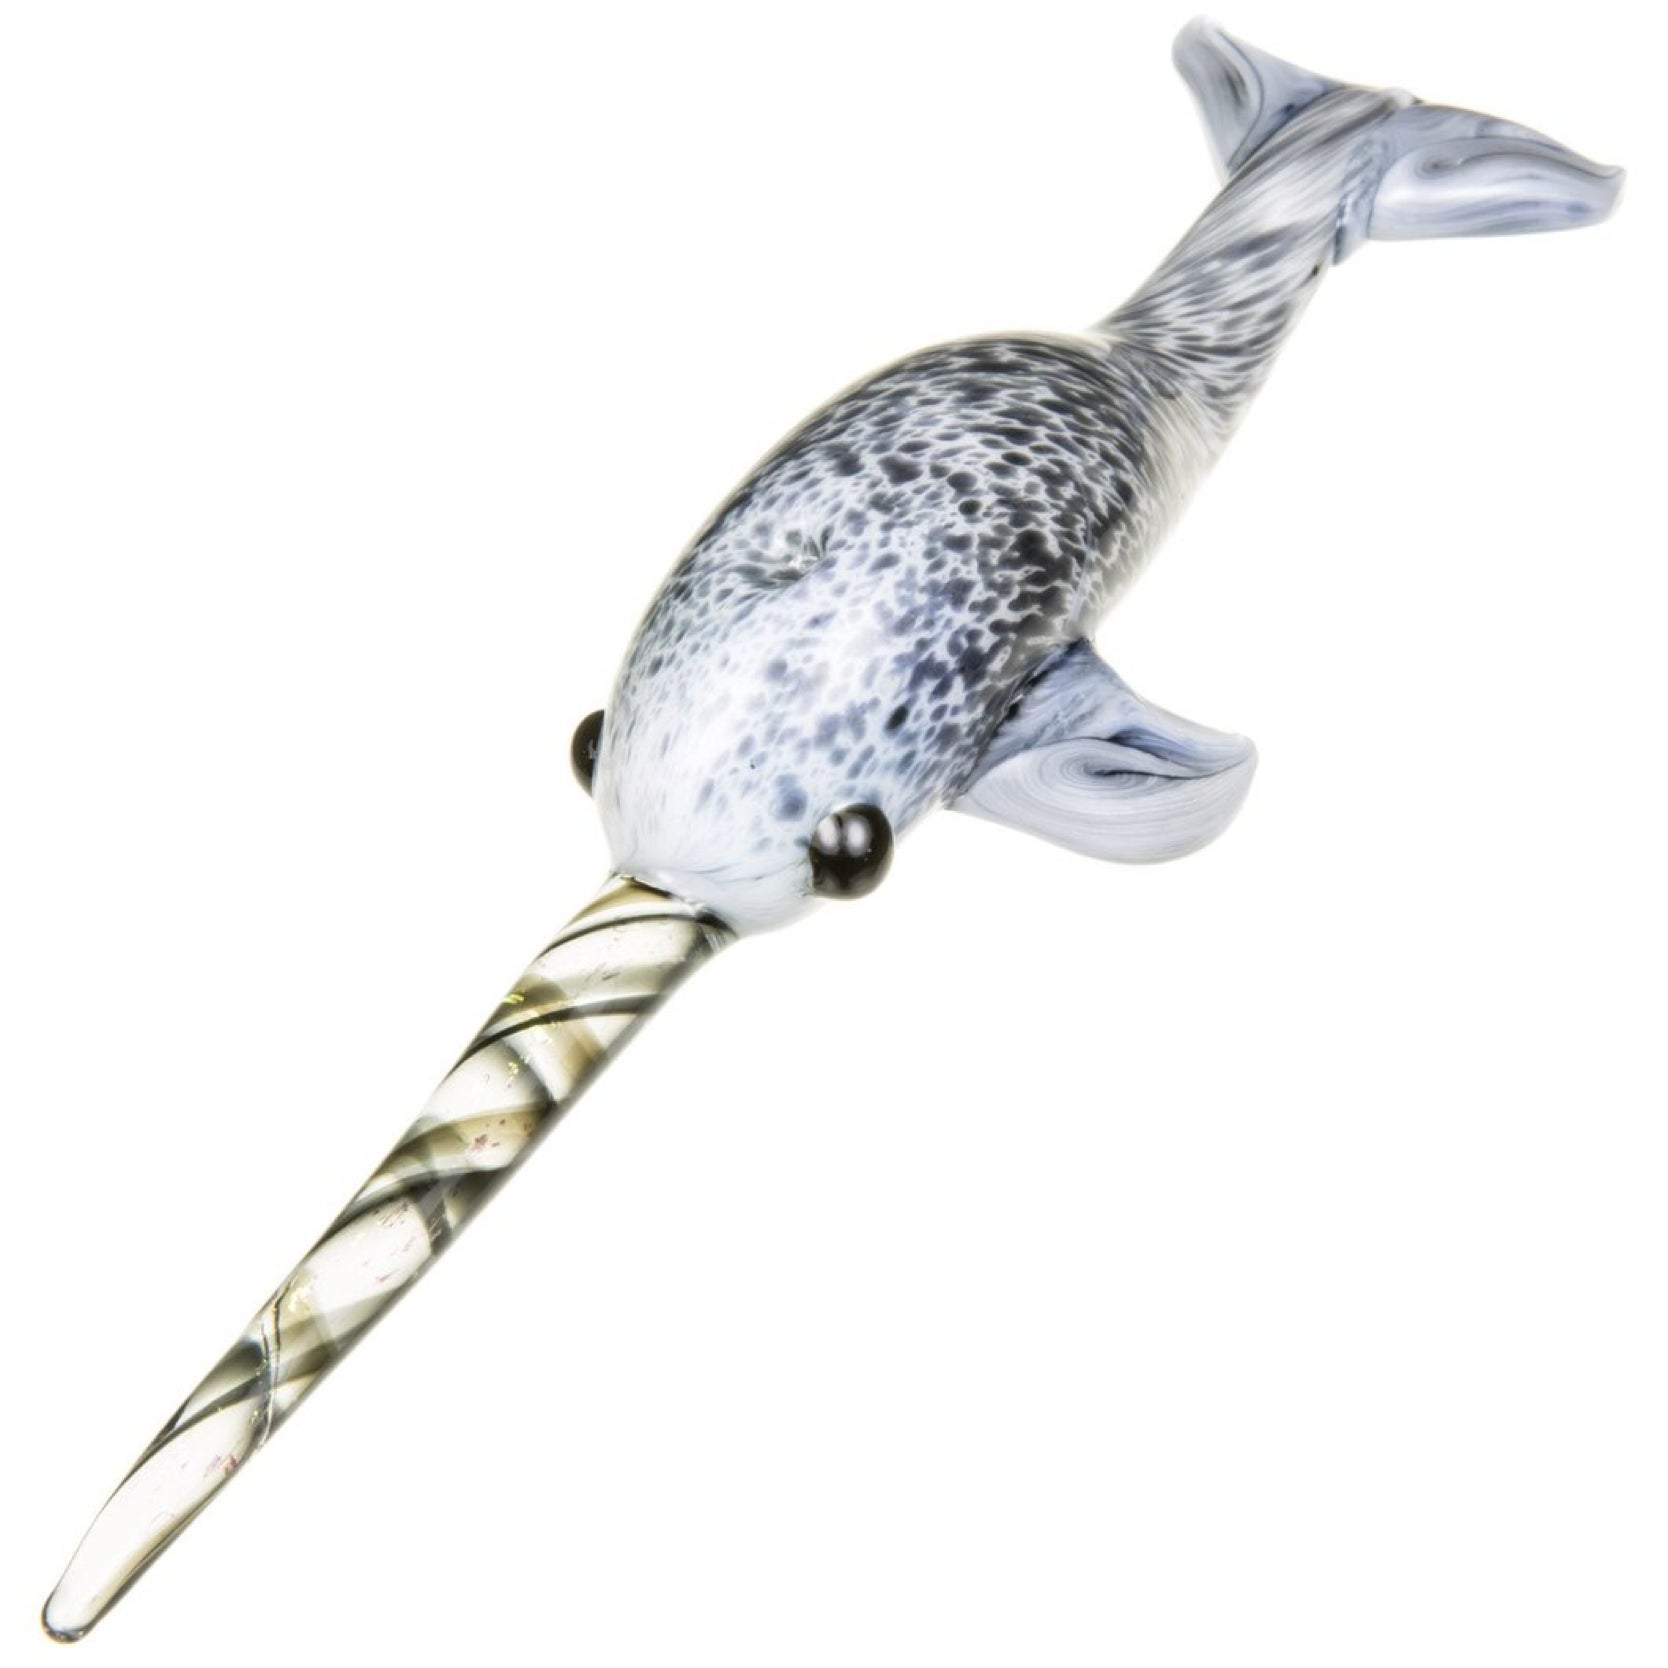 Empire Glassworks “Ned the Narwhal” Dabber Tool by Empire Glassworks | Mission Dispensary